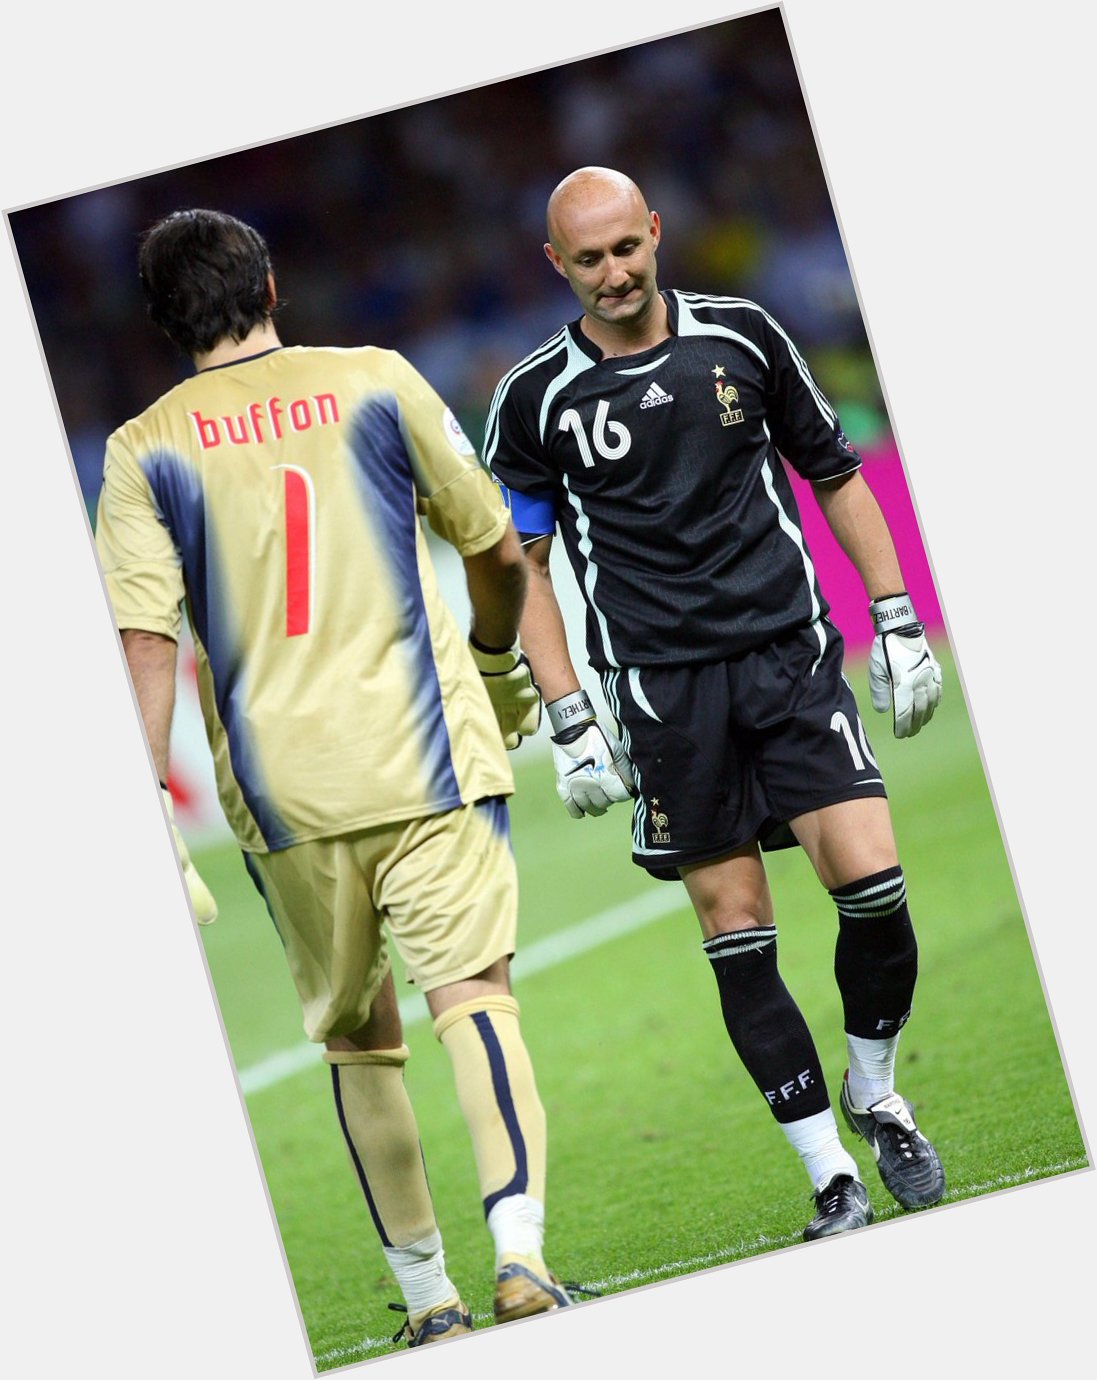 Happy birthday to Fabien Barthez, who turns 51 today. The best French goalkeeper of all time?  